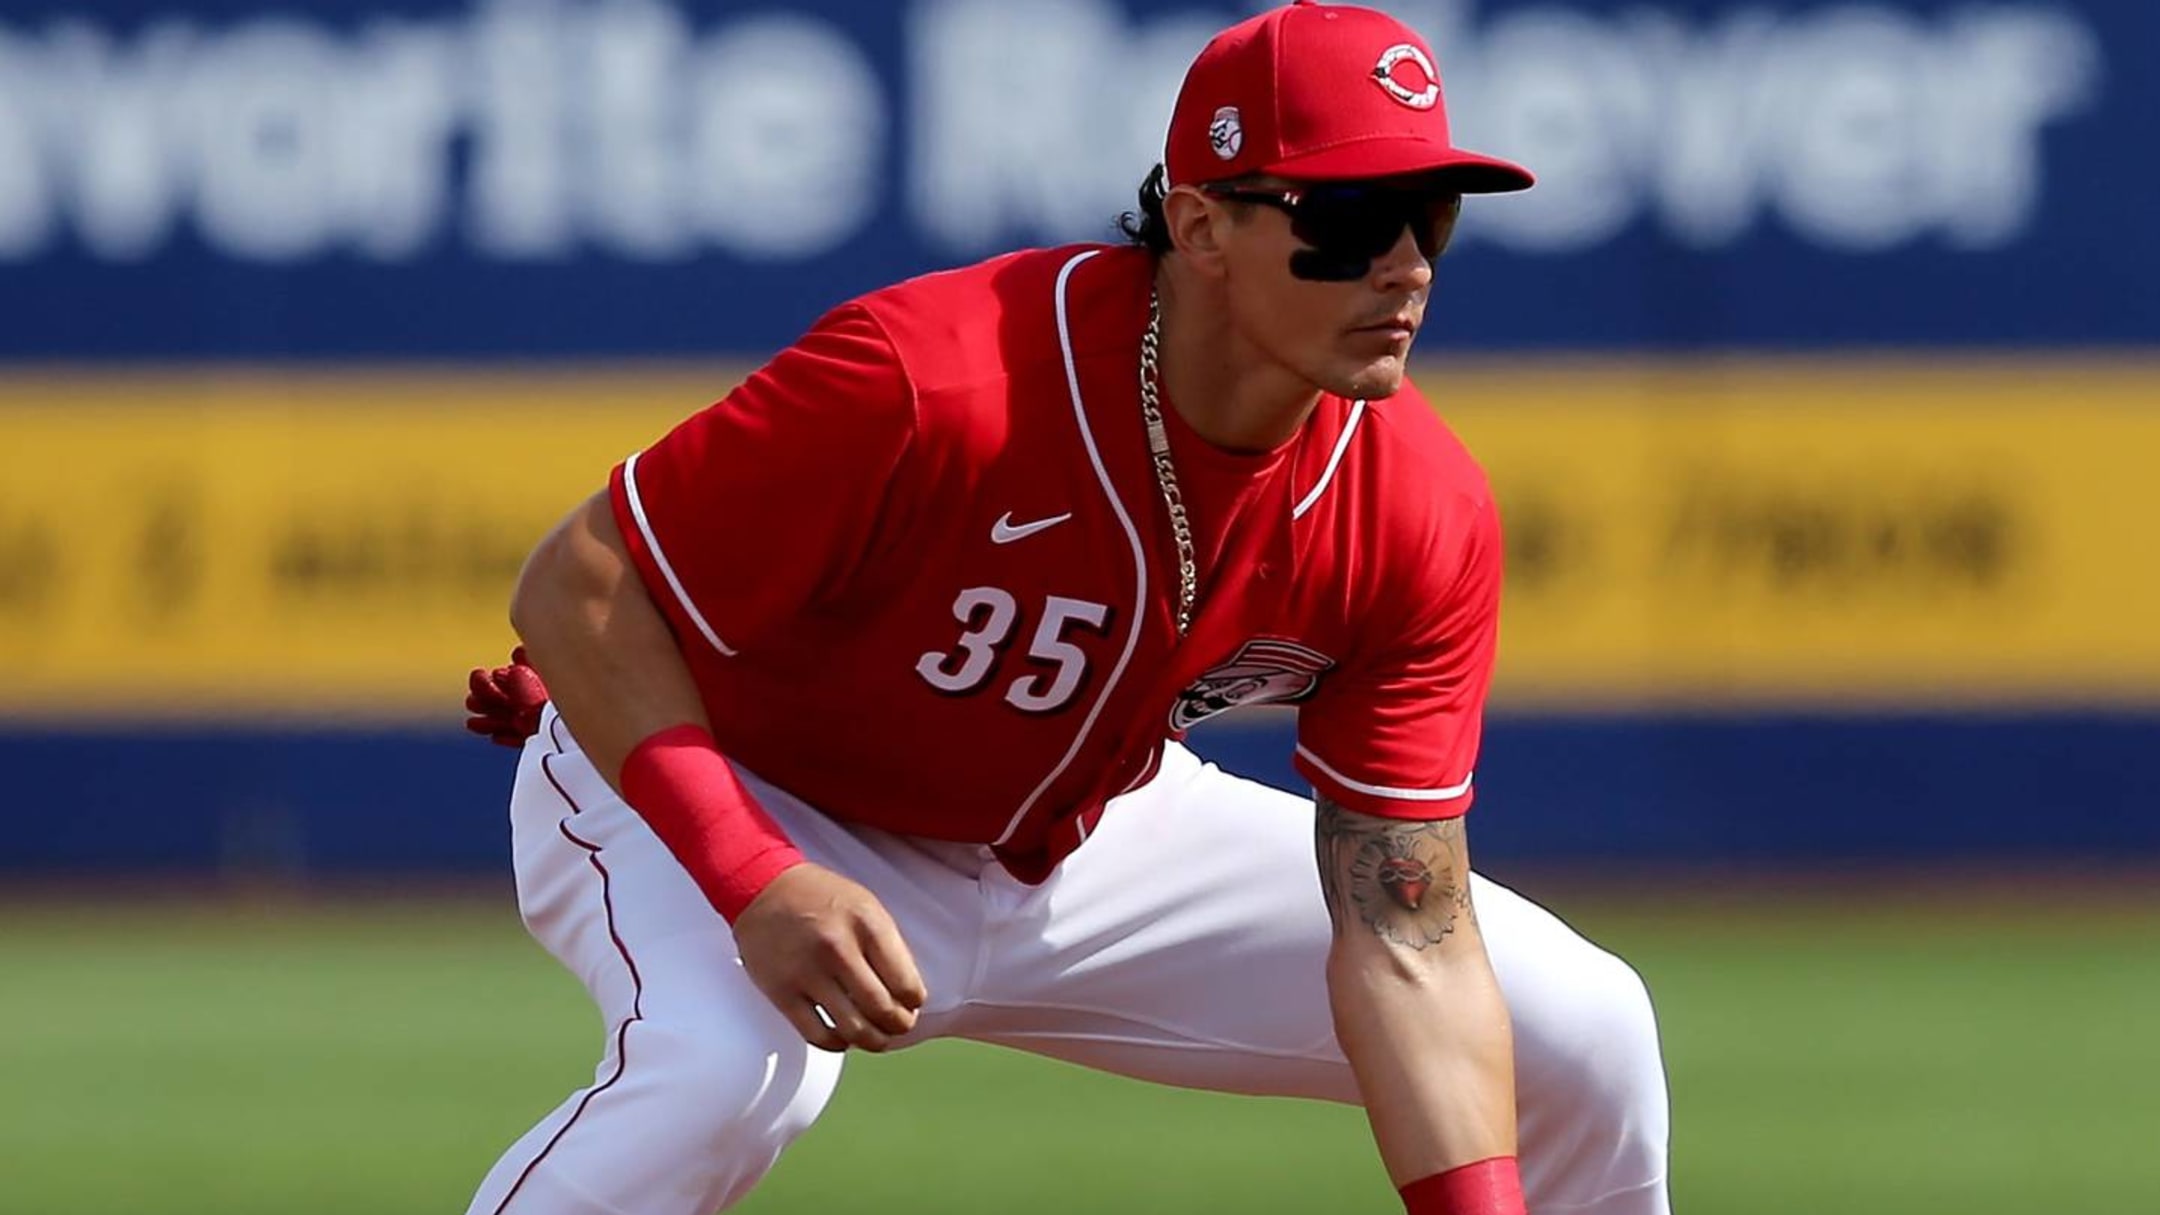 Derek Dietrich added to Reds summer roster after overcoming COVID-19